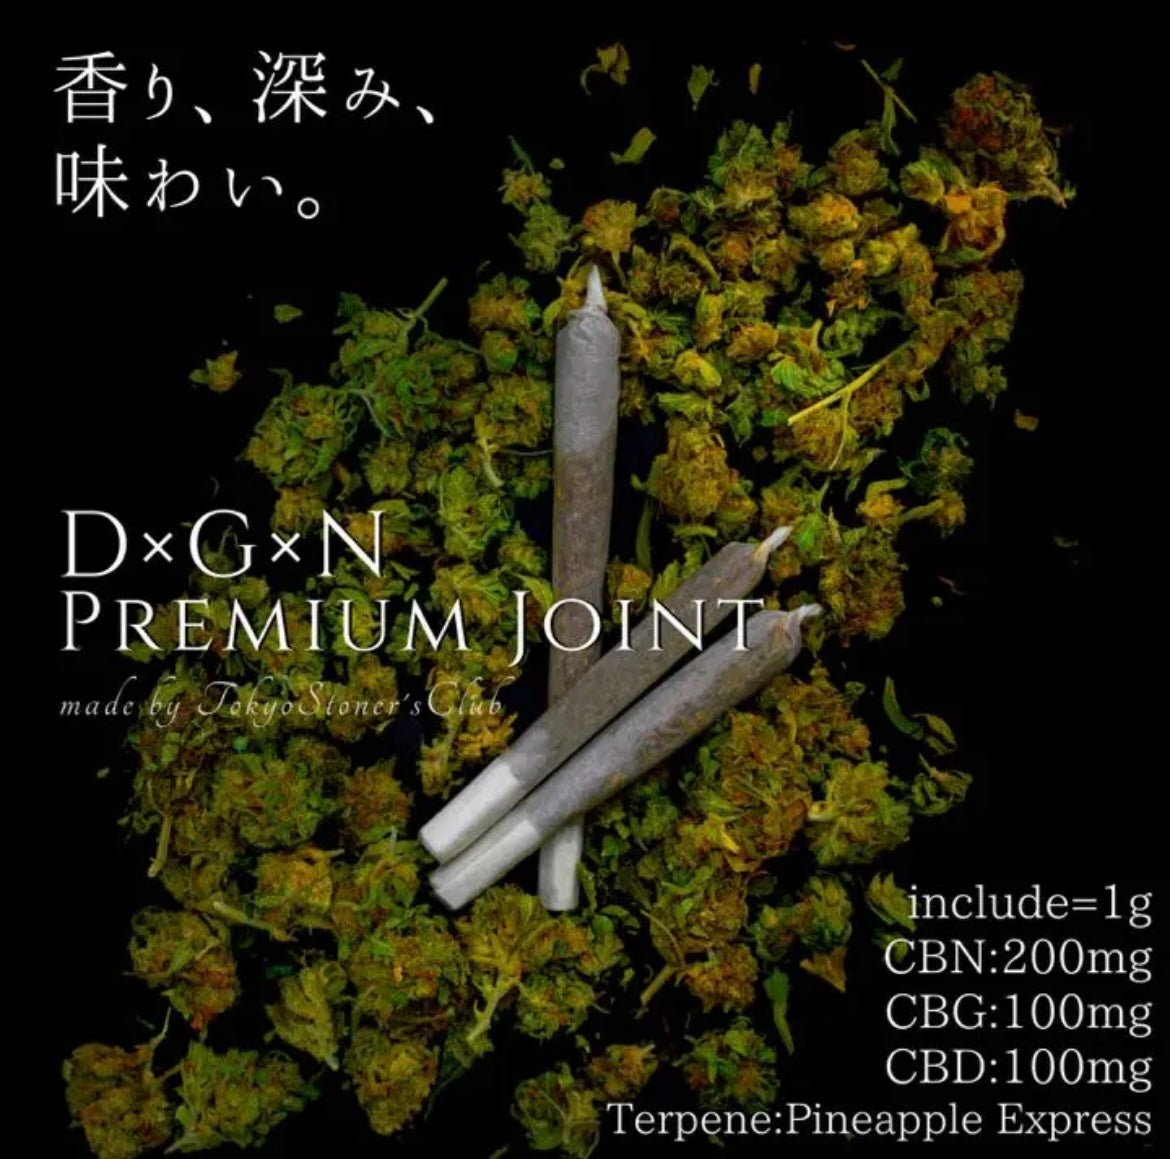 3 premium herb joints with high concentration DGN